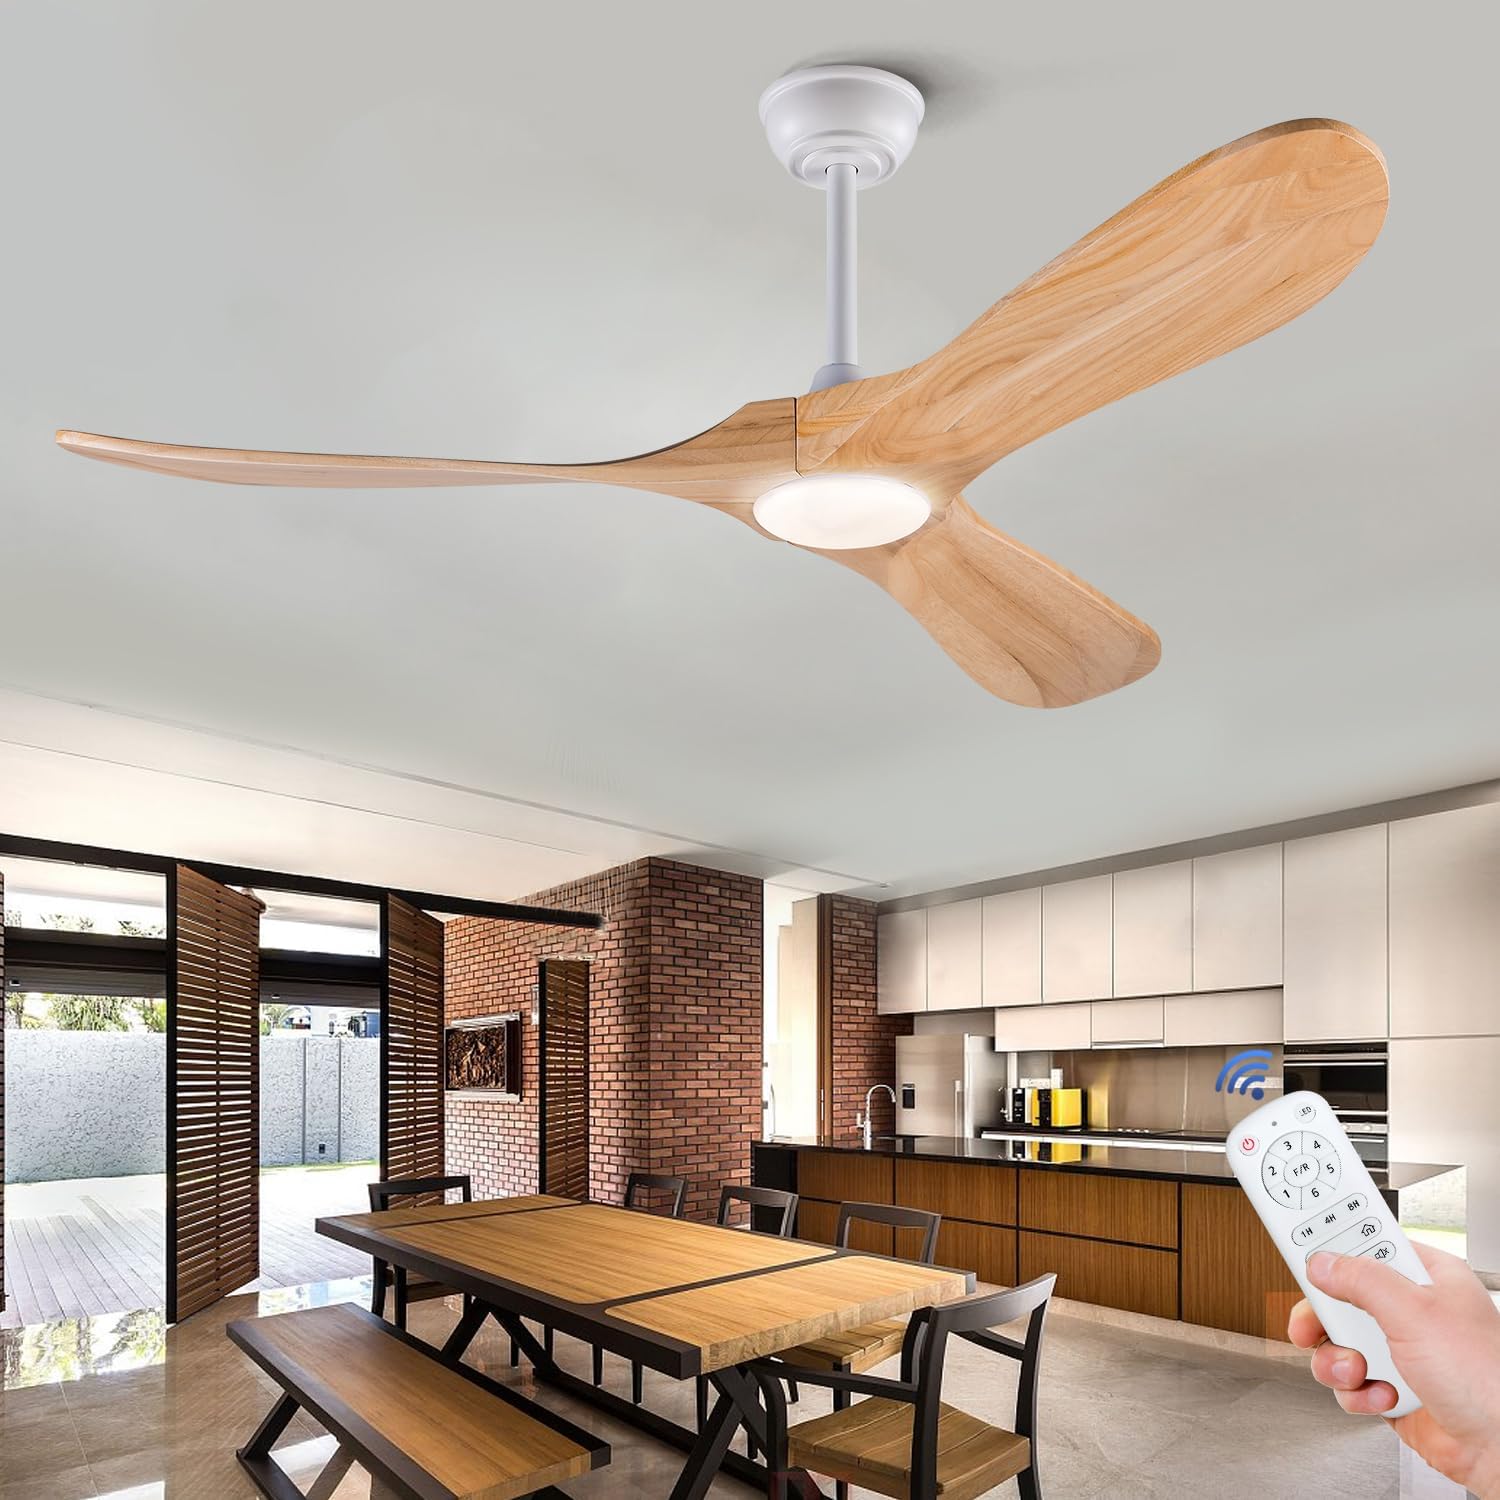 Unique lighted ceiling fans are designed to circulate air and provide a cooling breeze while also adding a touch of elegance to any room.